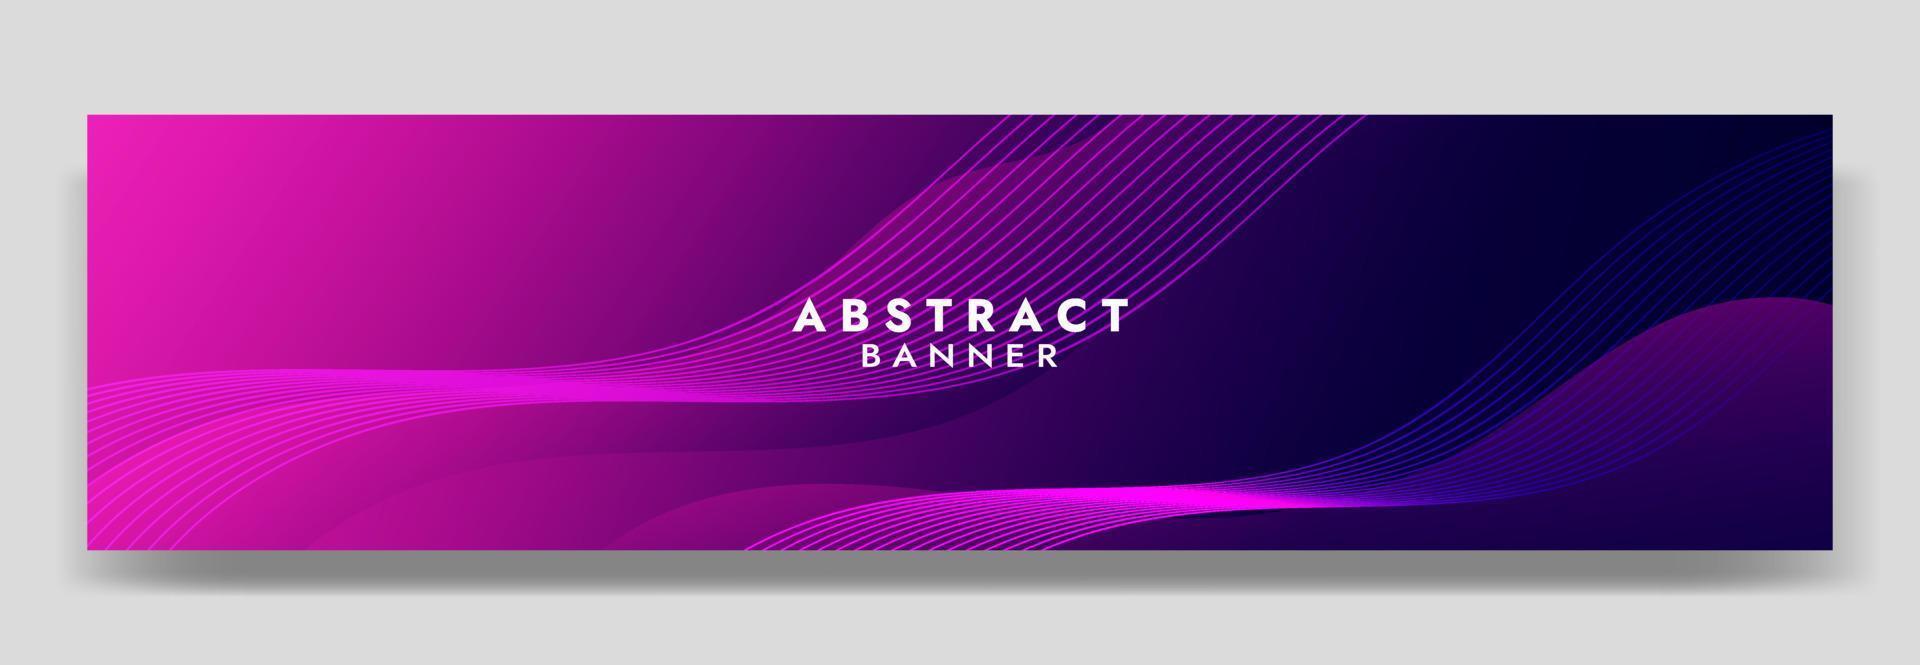 Abstract Purple Fluid Wave Banner Template vector